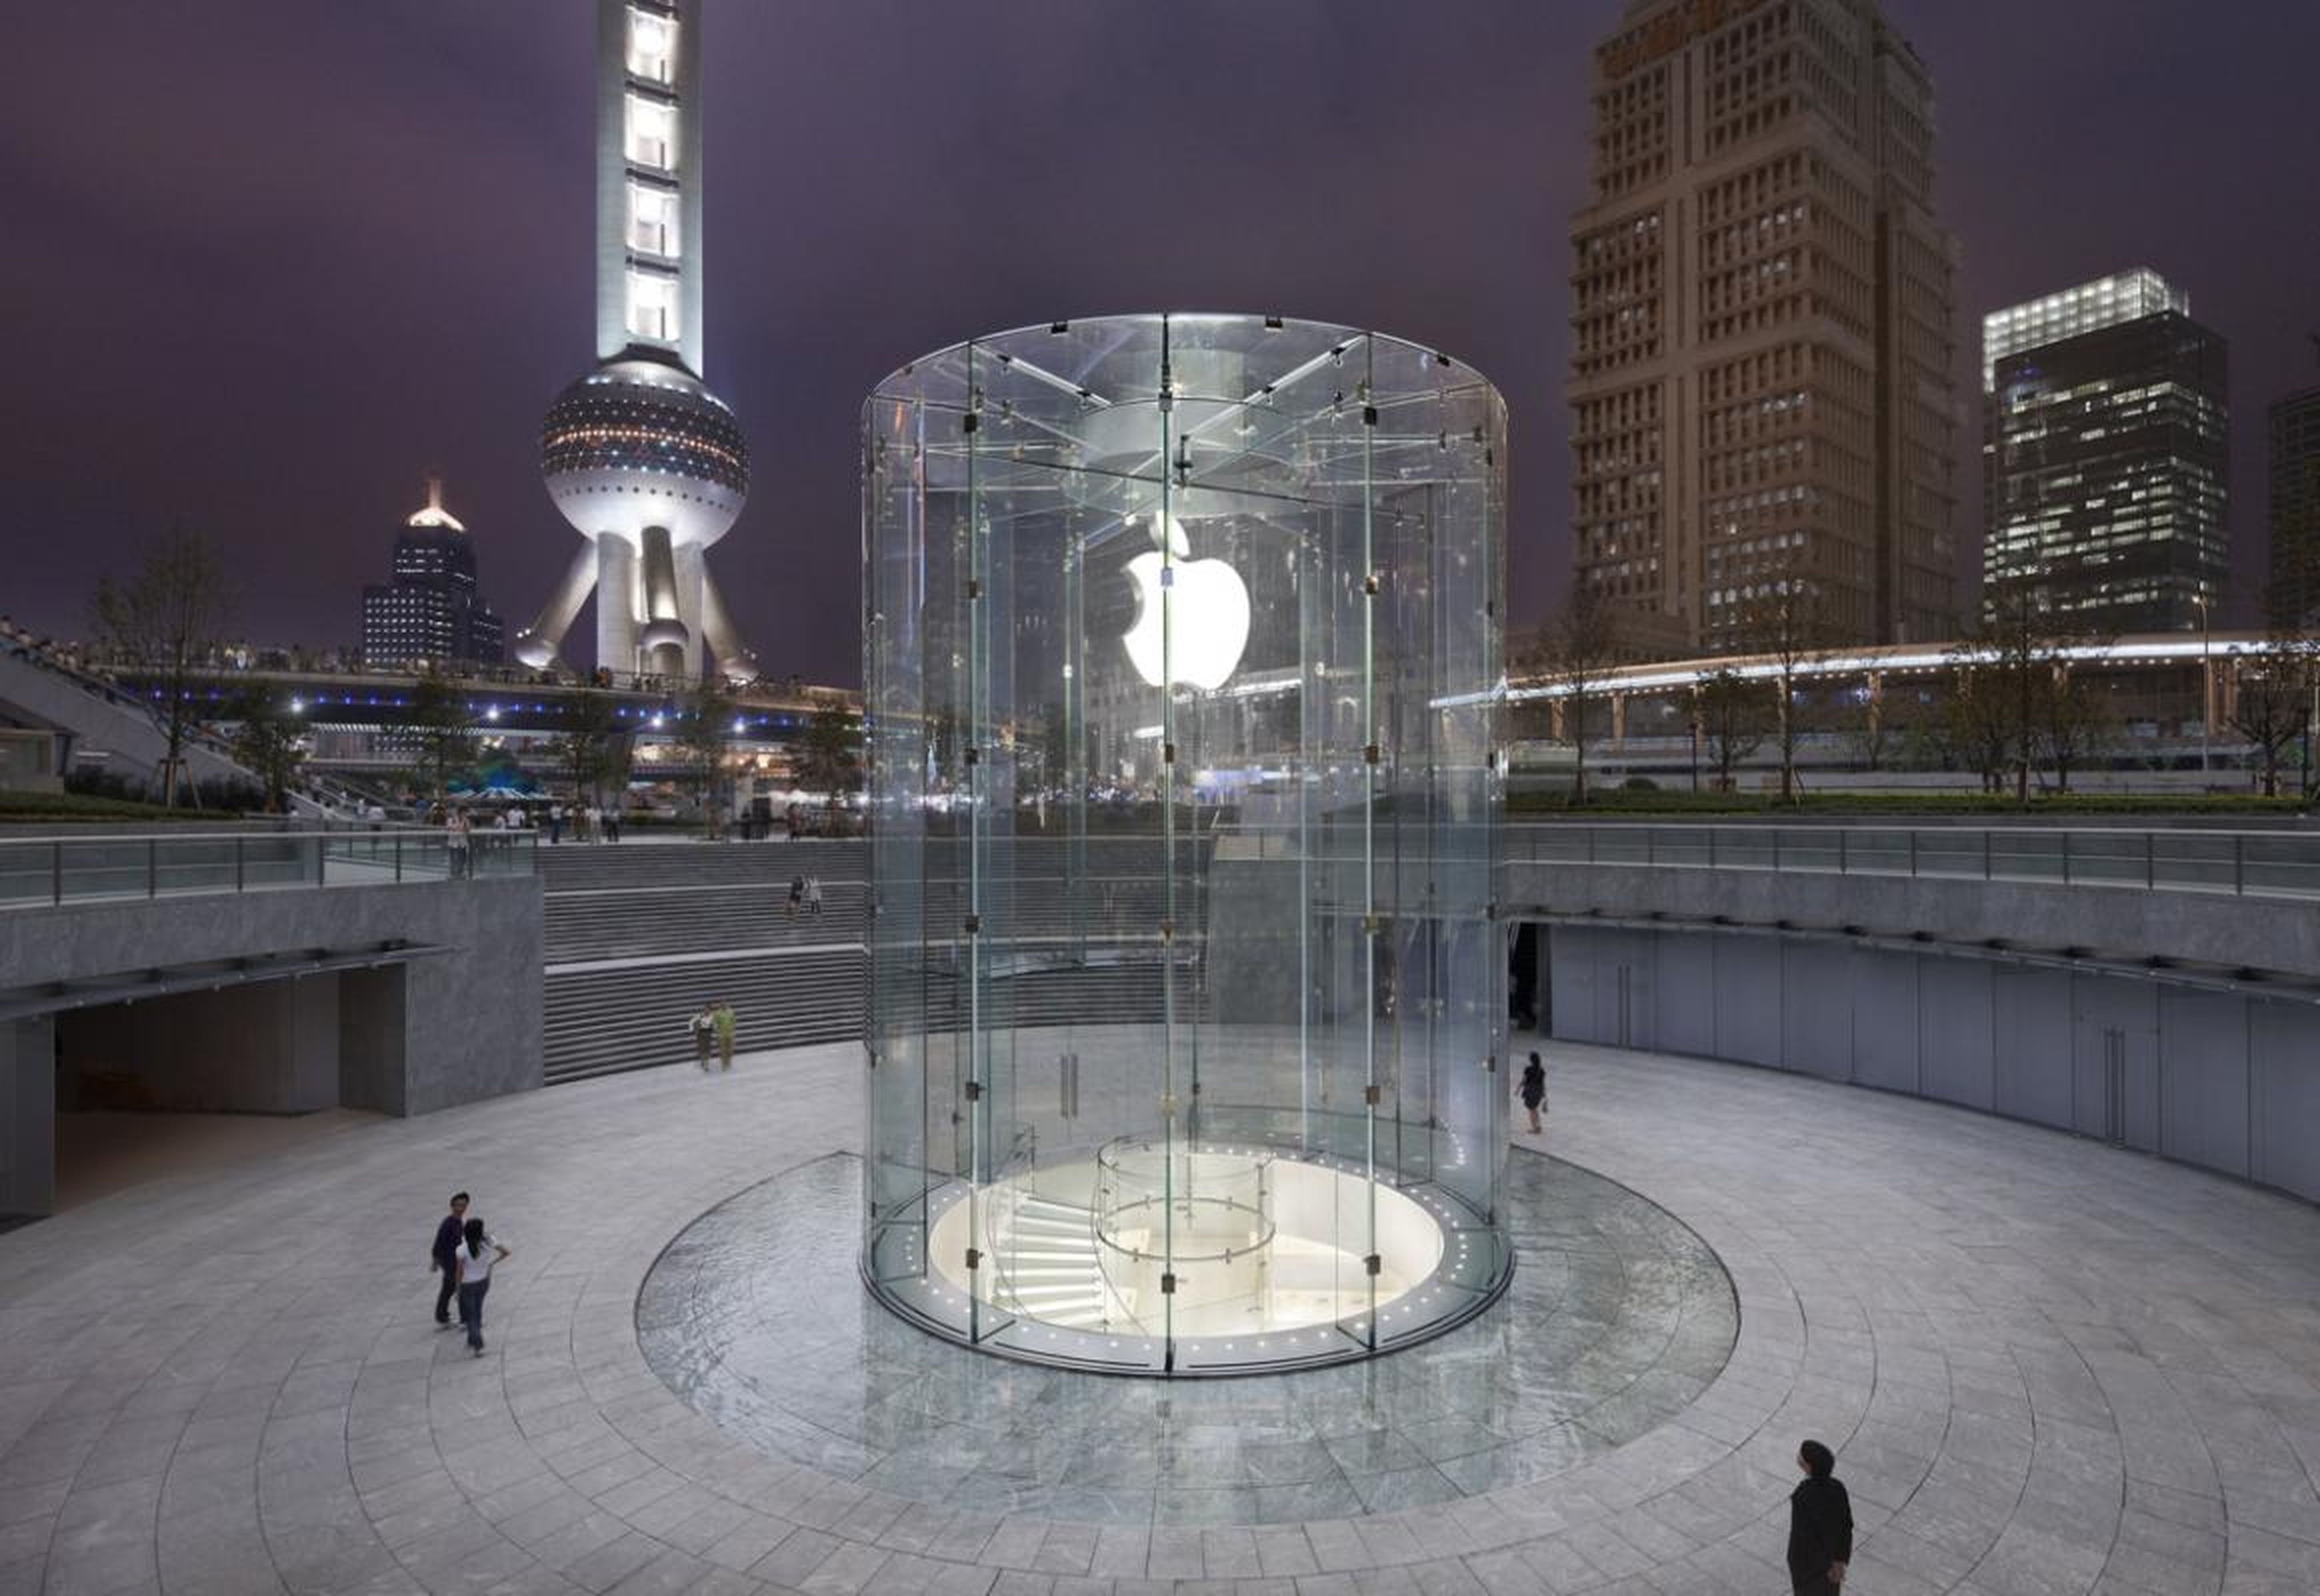 The 15 coolest Apple stores in the world, from New York's Grand Central Station to London's Regent Street